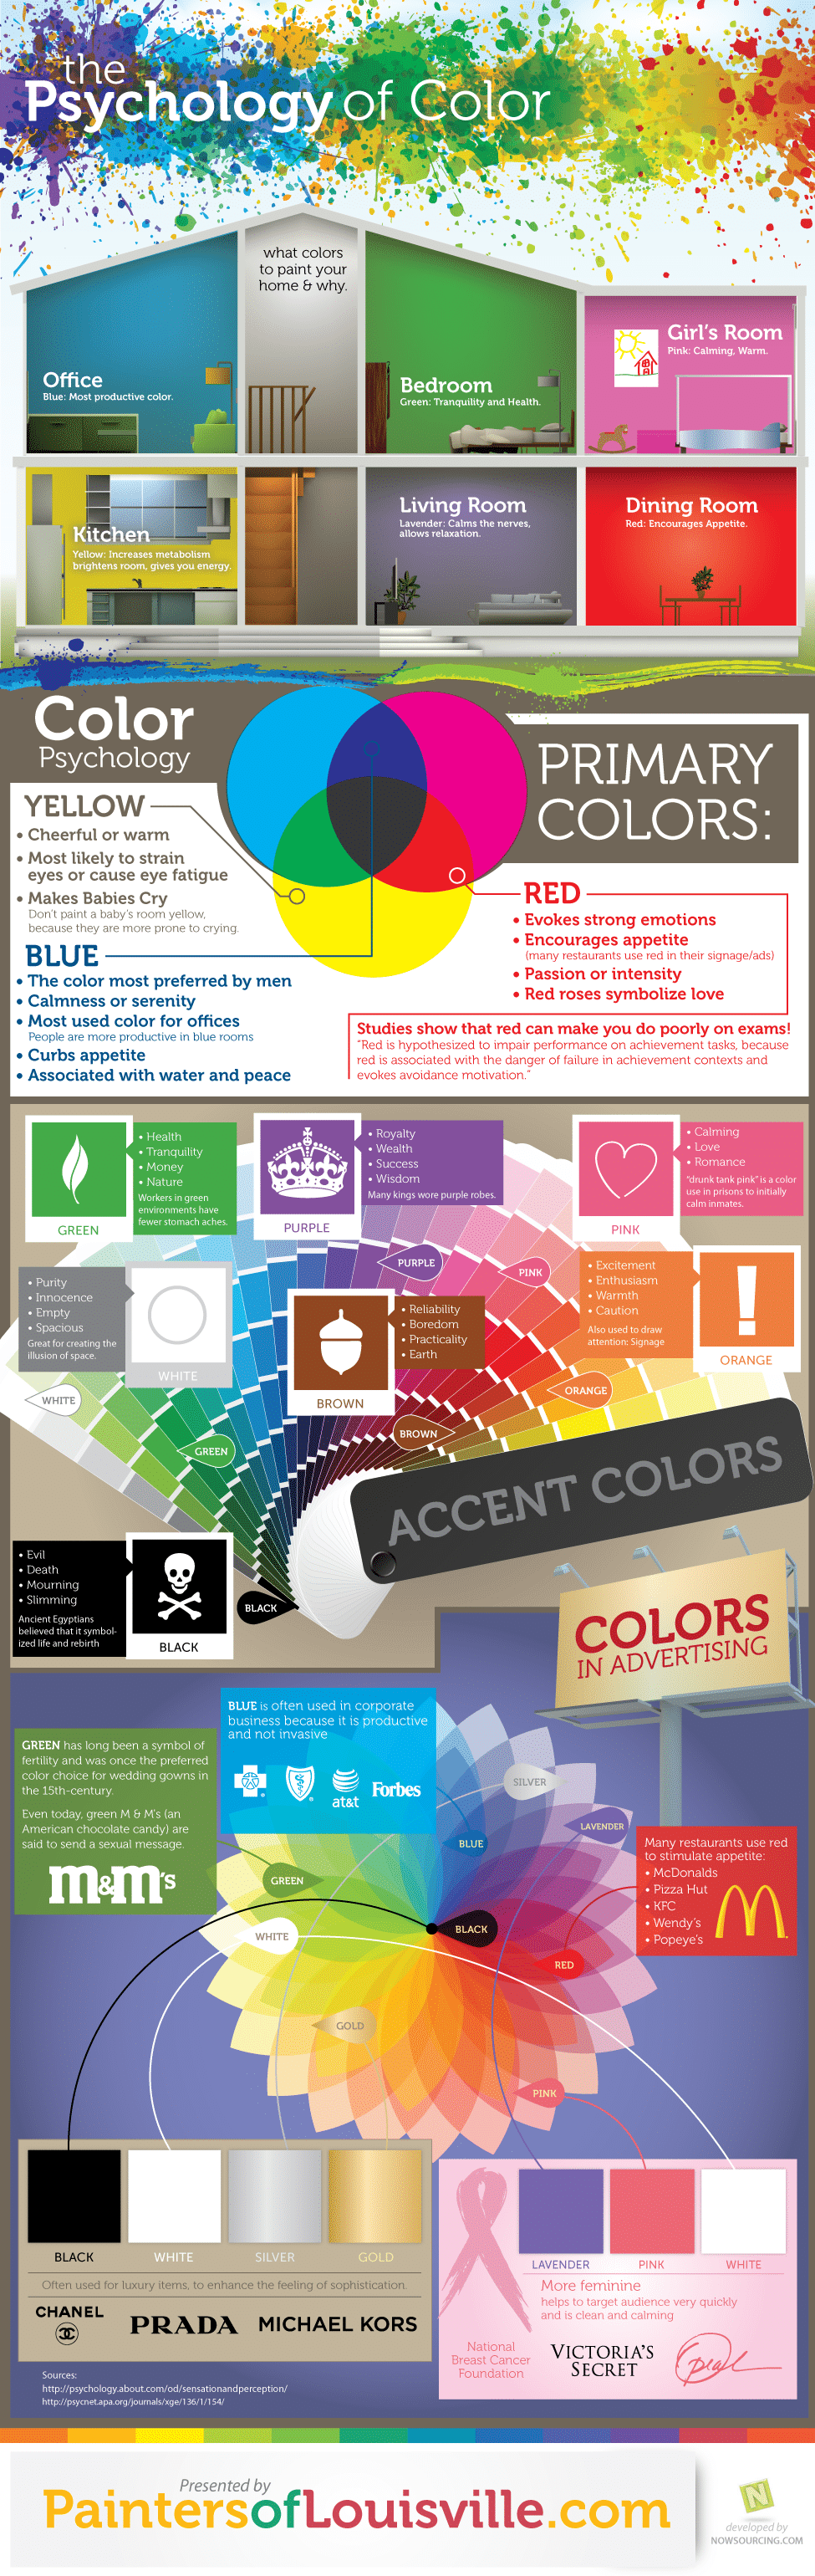 the-psuchology-of-color-infographic